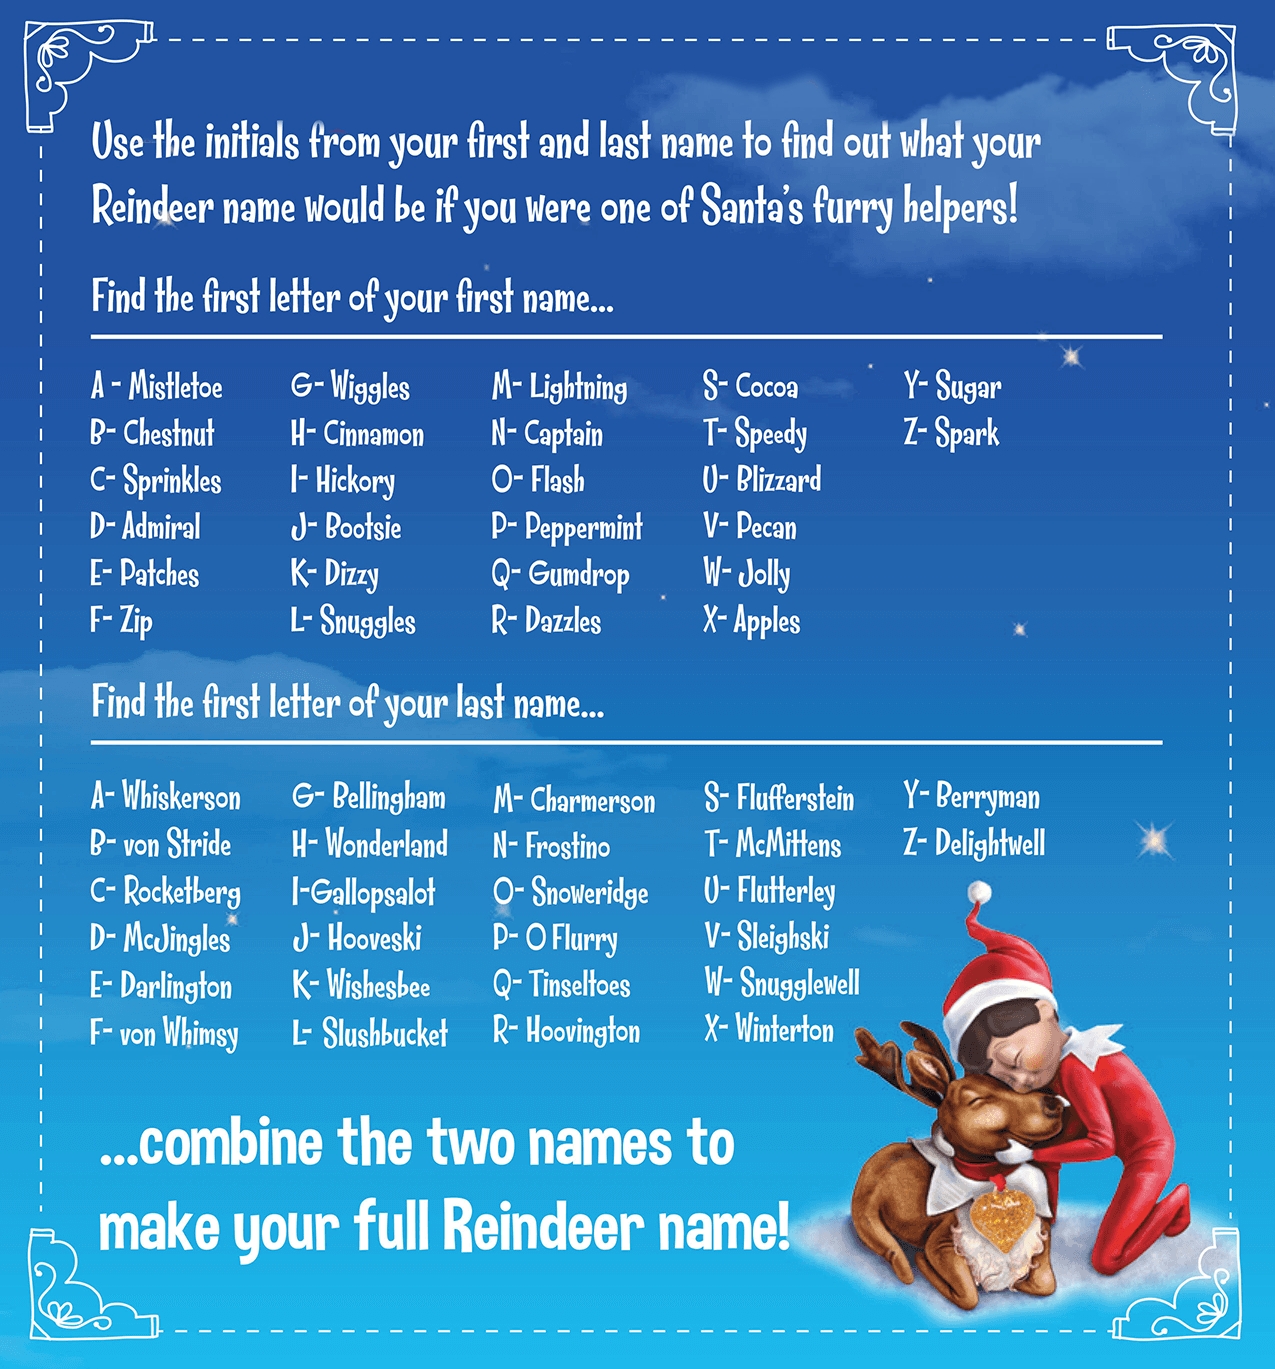 10 Famous Elf On A Shelf Names Ideas if you were a reindeer what would your name be elf pets shelf 2 2022